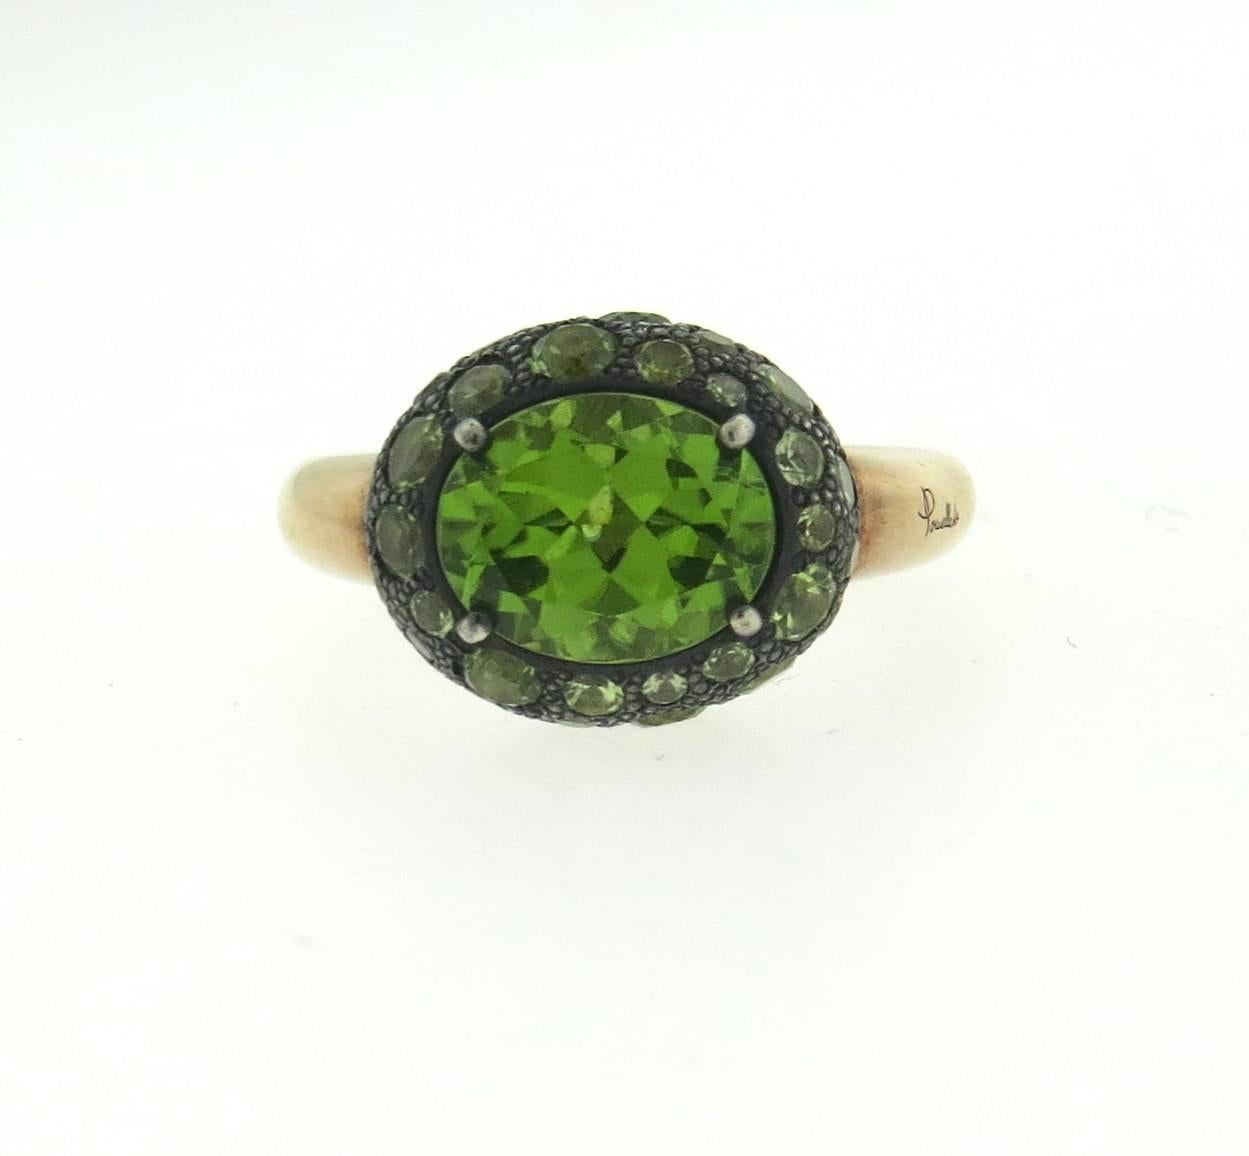 New Pomellato 18k rose gold and burnished silver ring, crafted by Tabou collection, set with peridot gemstones. Ring size - 6 1/4, ring top is 12.5mm x 15mm . Weight of the piece - 10 grams
Retail $4300